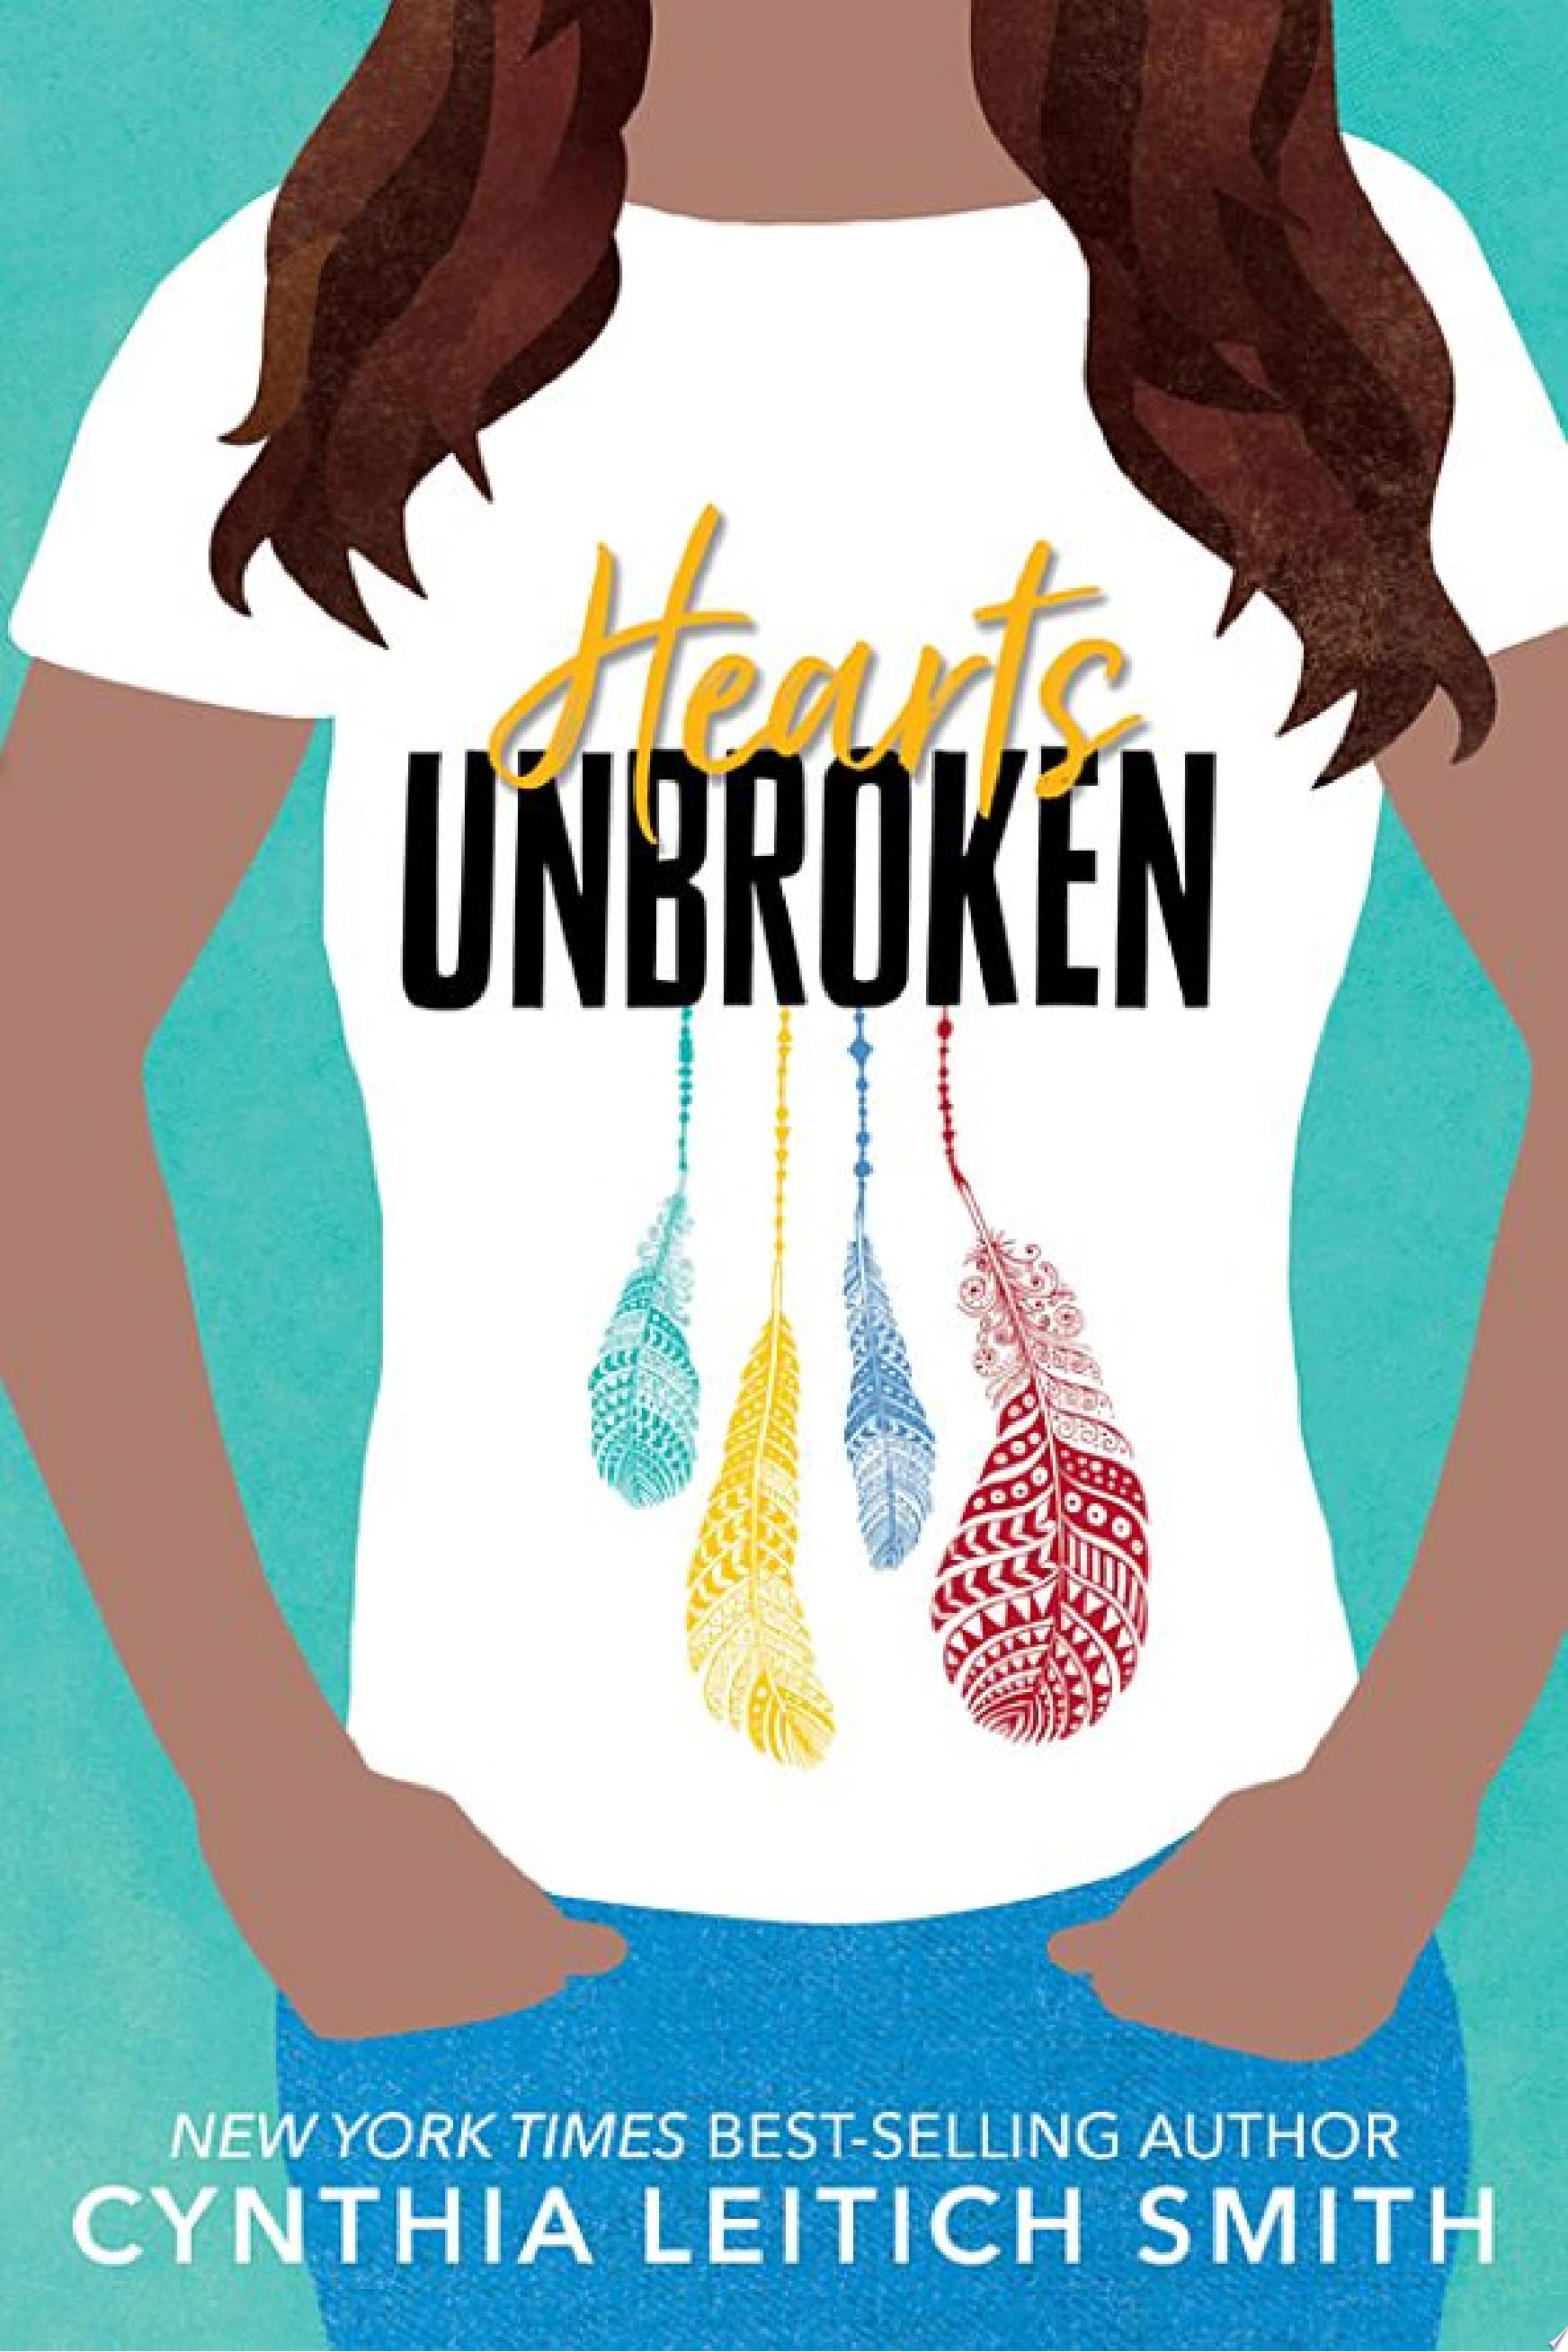 Cover Image for "Hearts Unbroken"